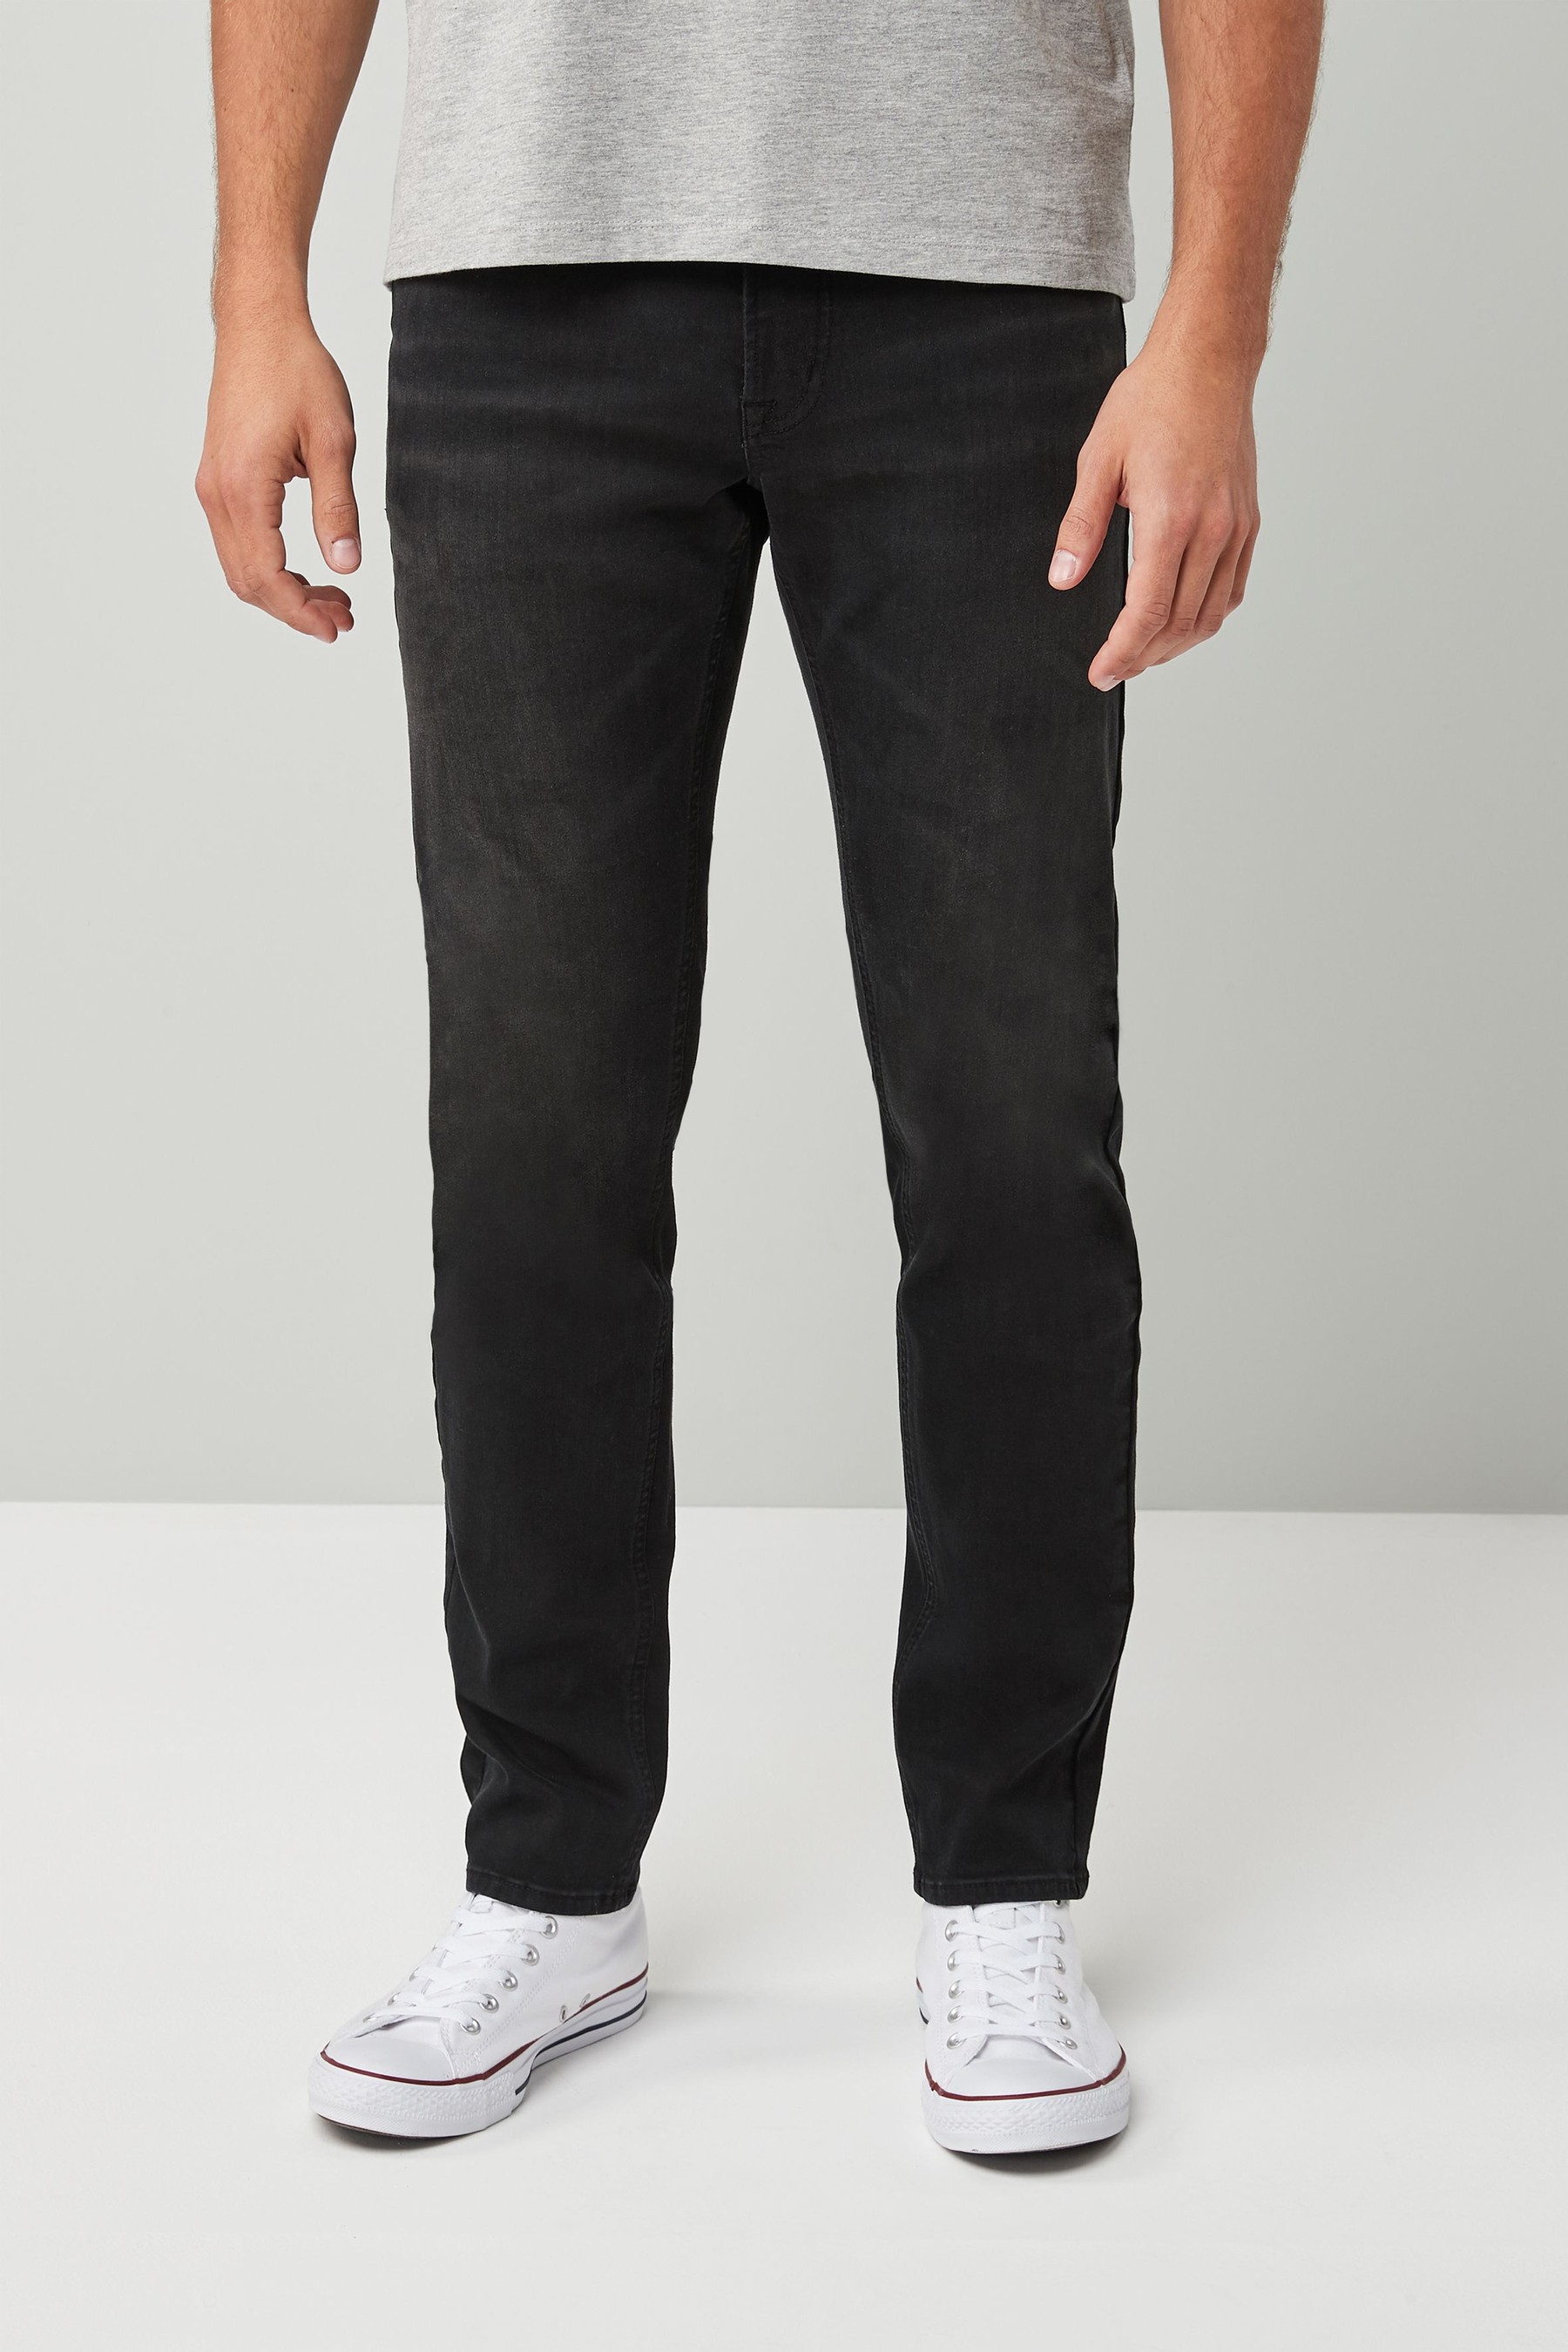 Buy Motion Flex Stretch Jeans from the Next UK online shop